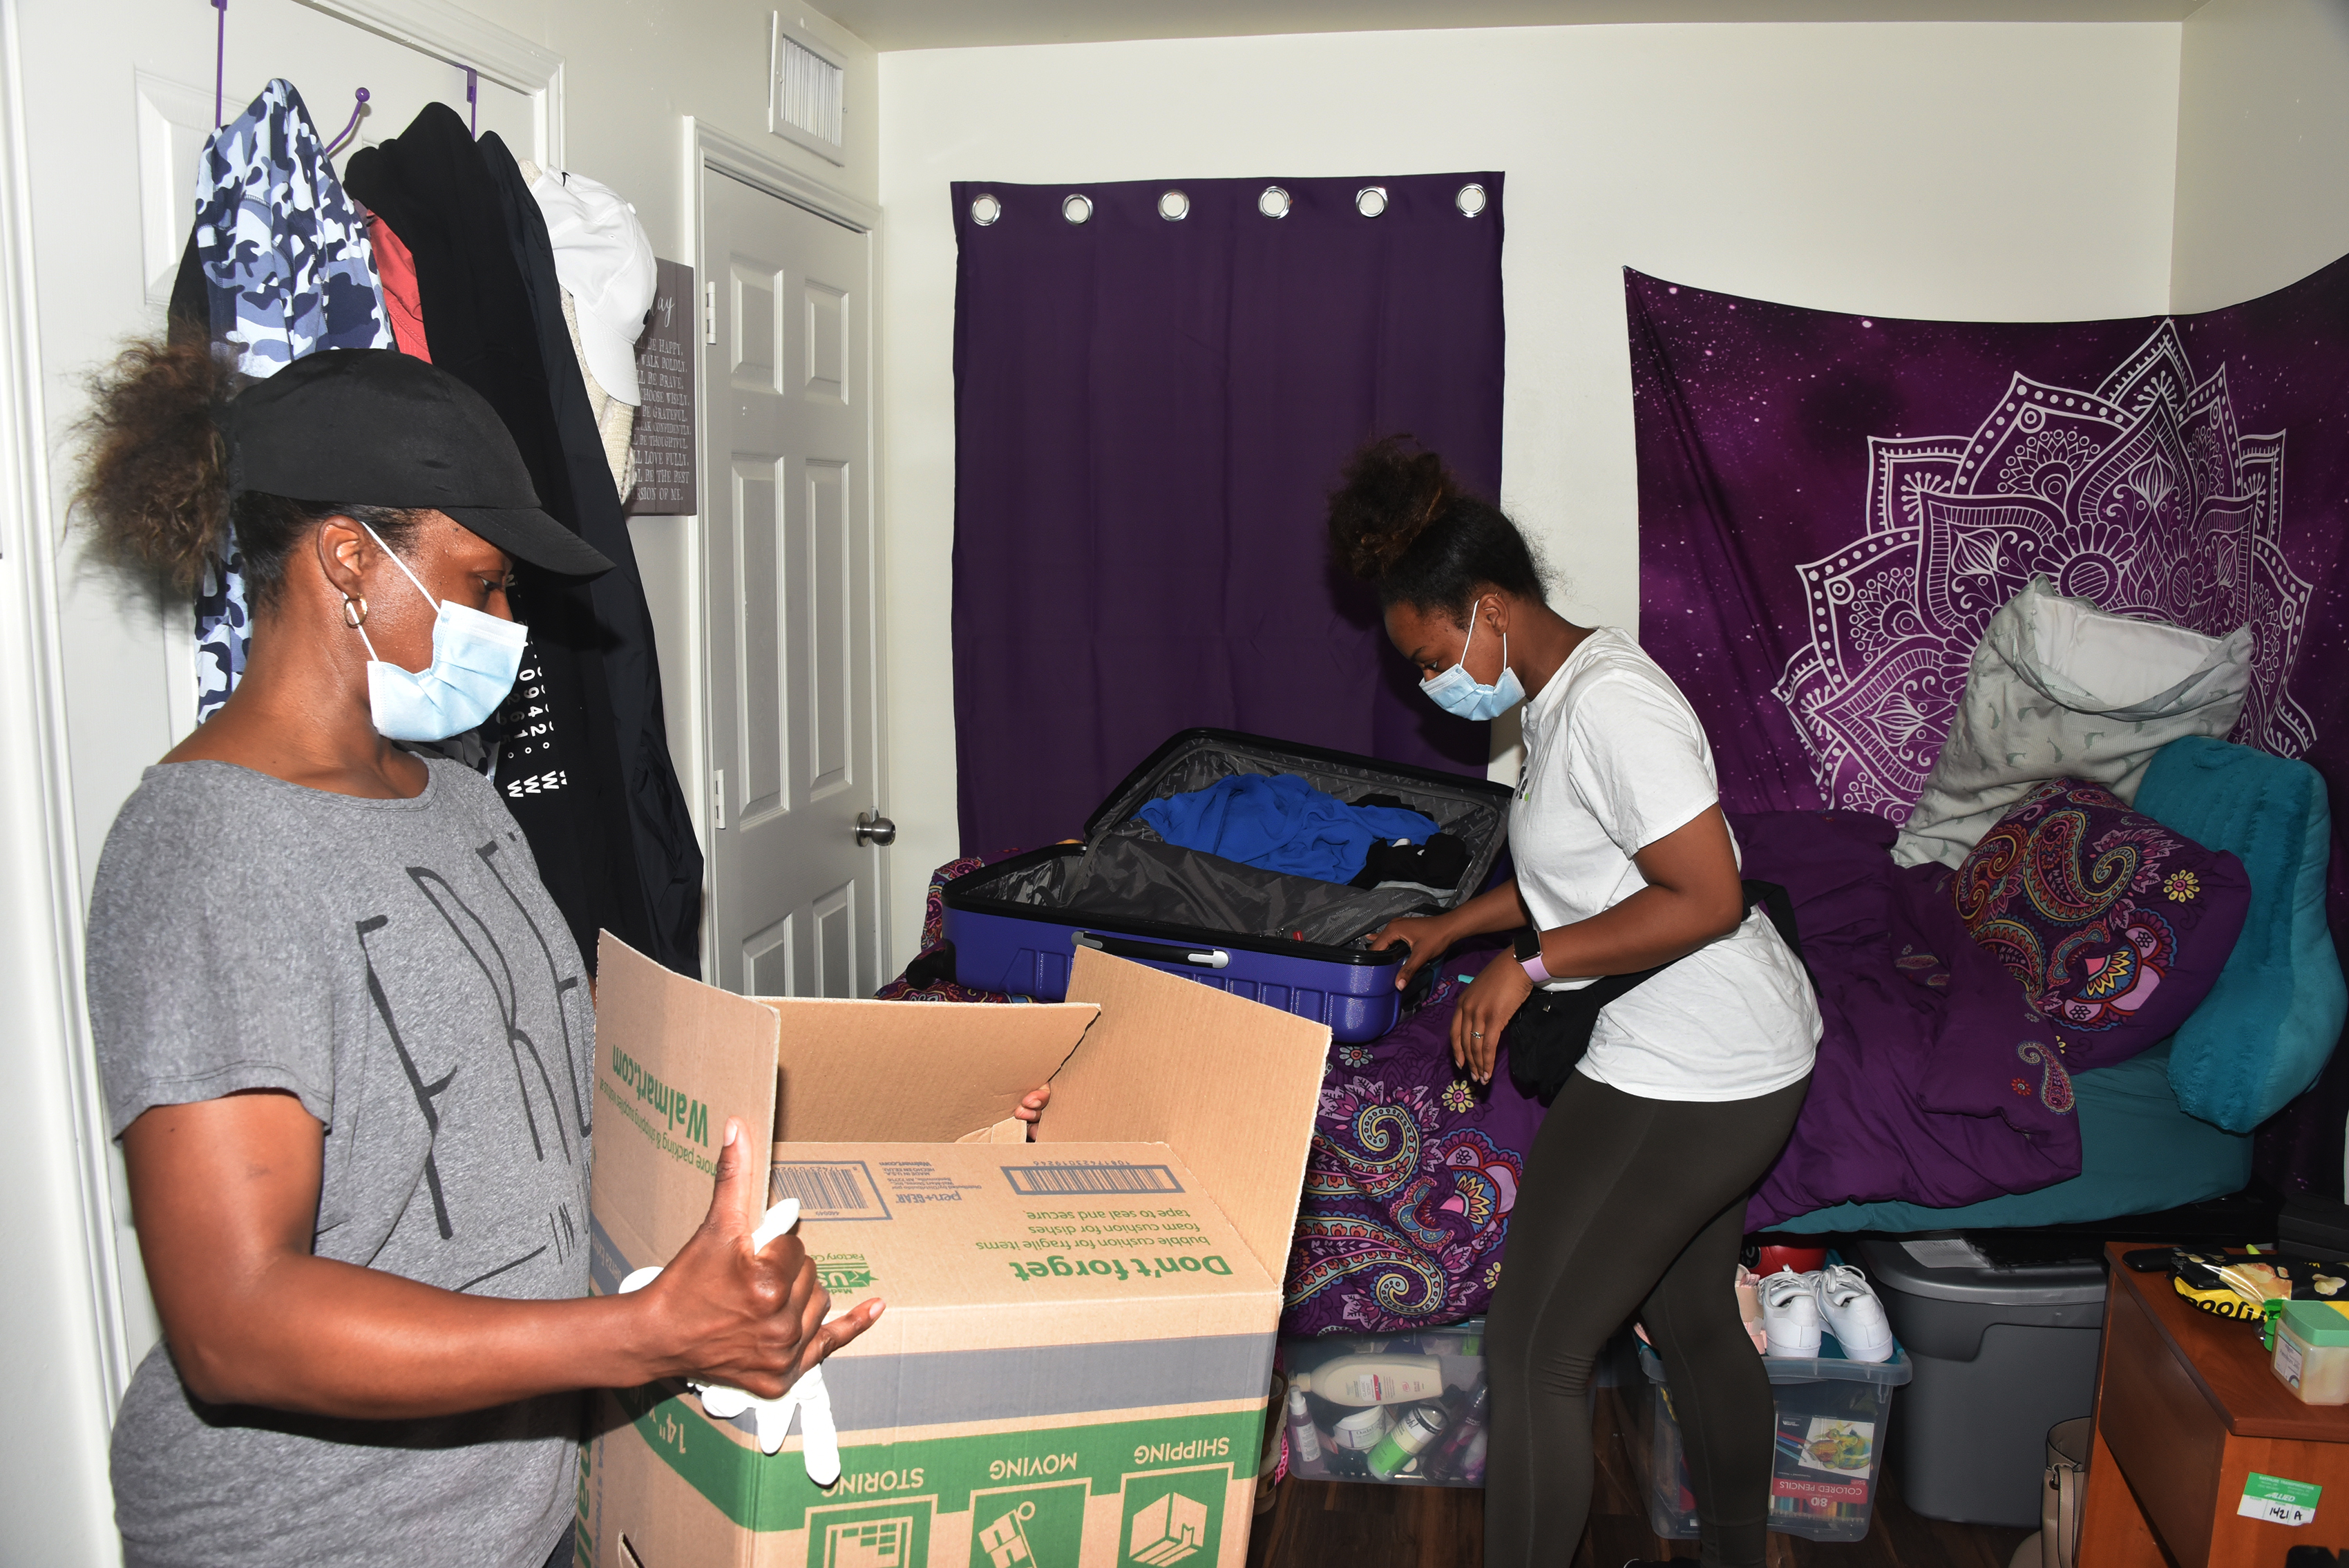 Lucinda Ward (l) helps her daughter, Caityn Ward, pack up her belongings. A 2020 graduate, Caityn is among the 270 recent graduates who are collecting their possessions and clearing out of their residences May 26-29.